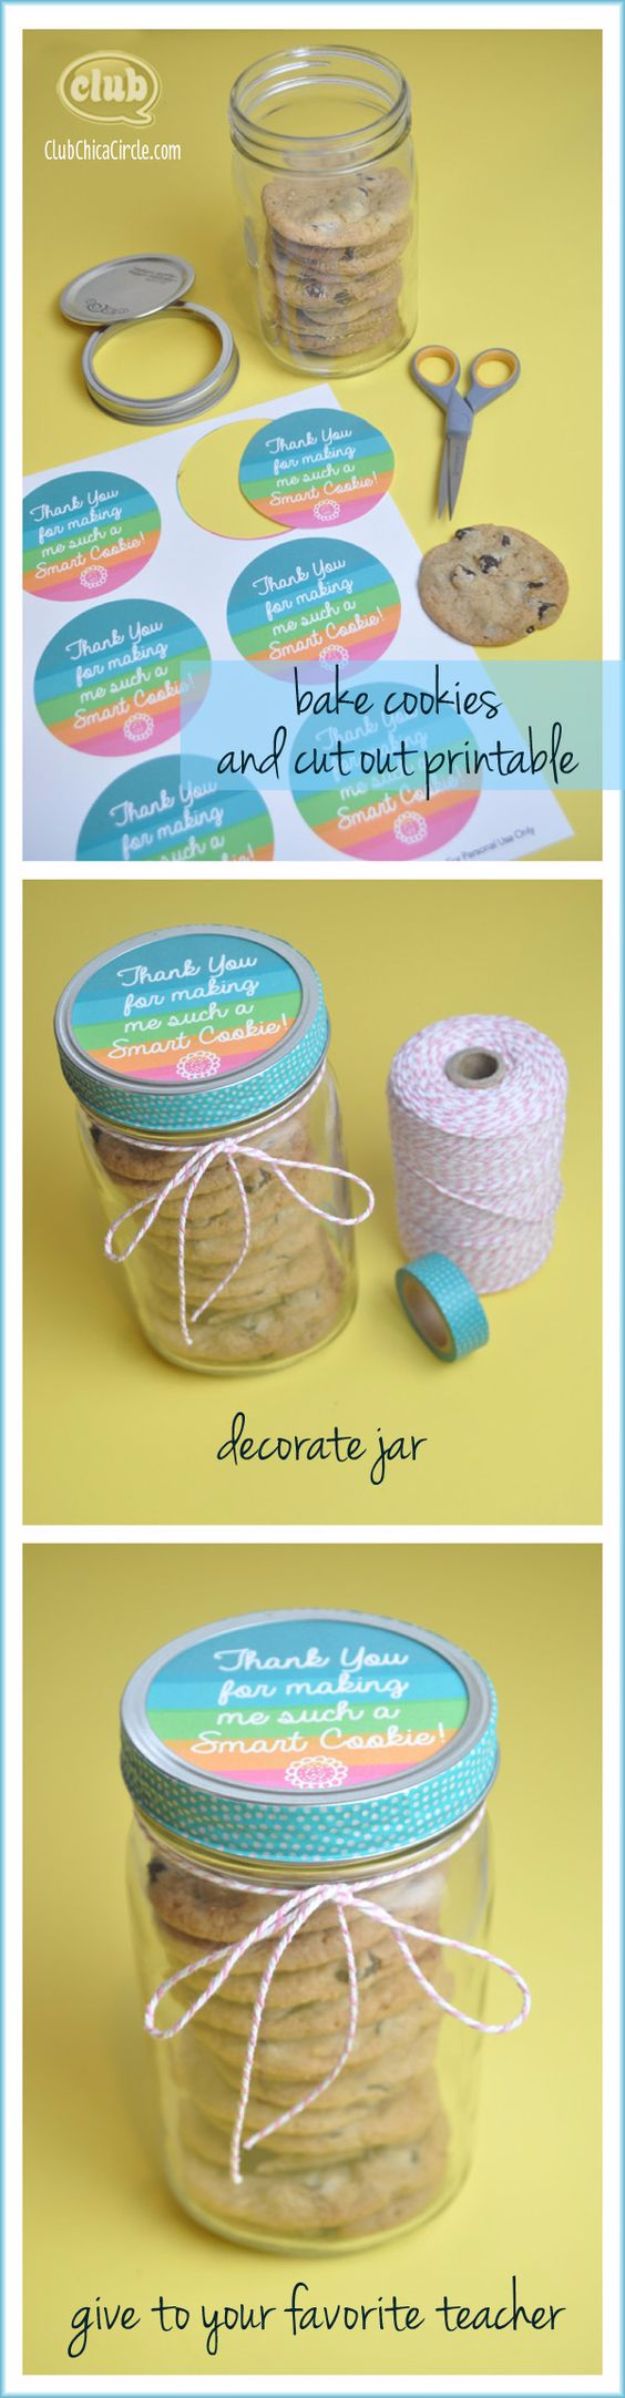 15 Lovely Free Printables And Templates To Spice Up Your Mason Jar Gifts